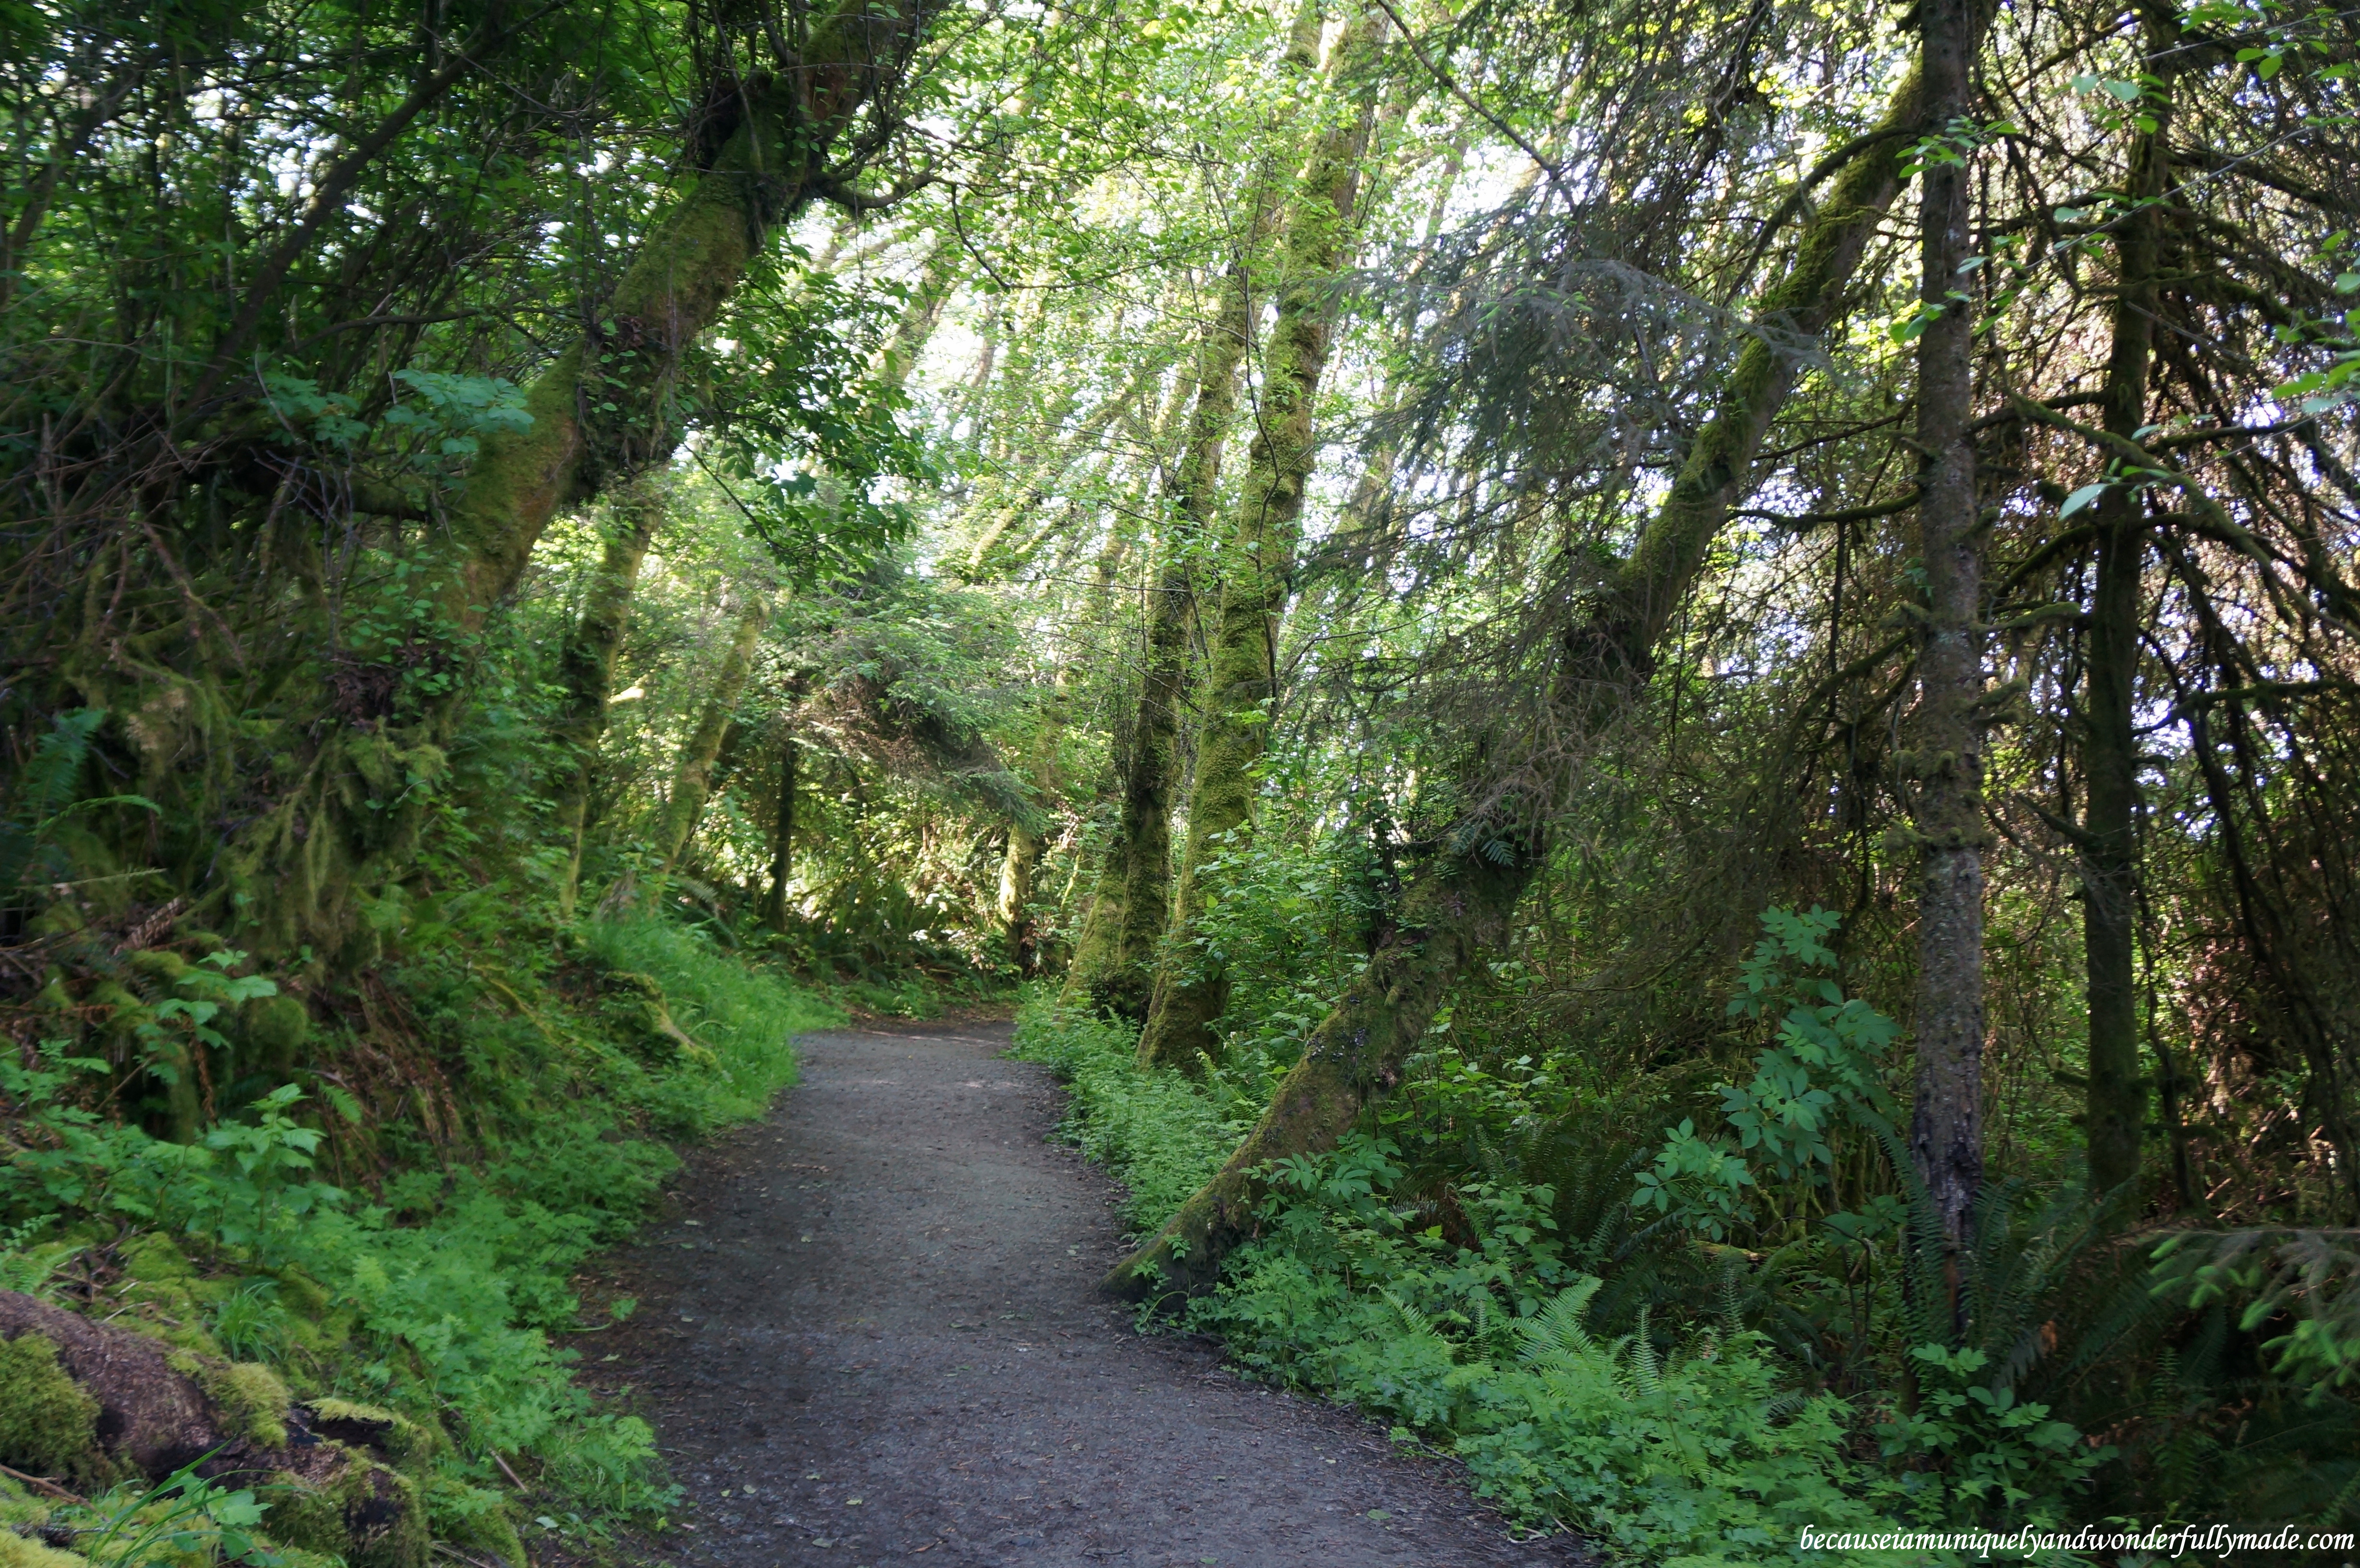 Walking towards the start of the Fern Canyon Loop Trail at Redwood National and State Park in California.